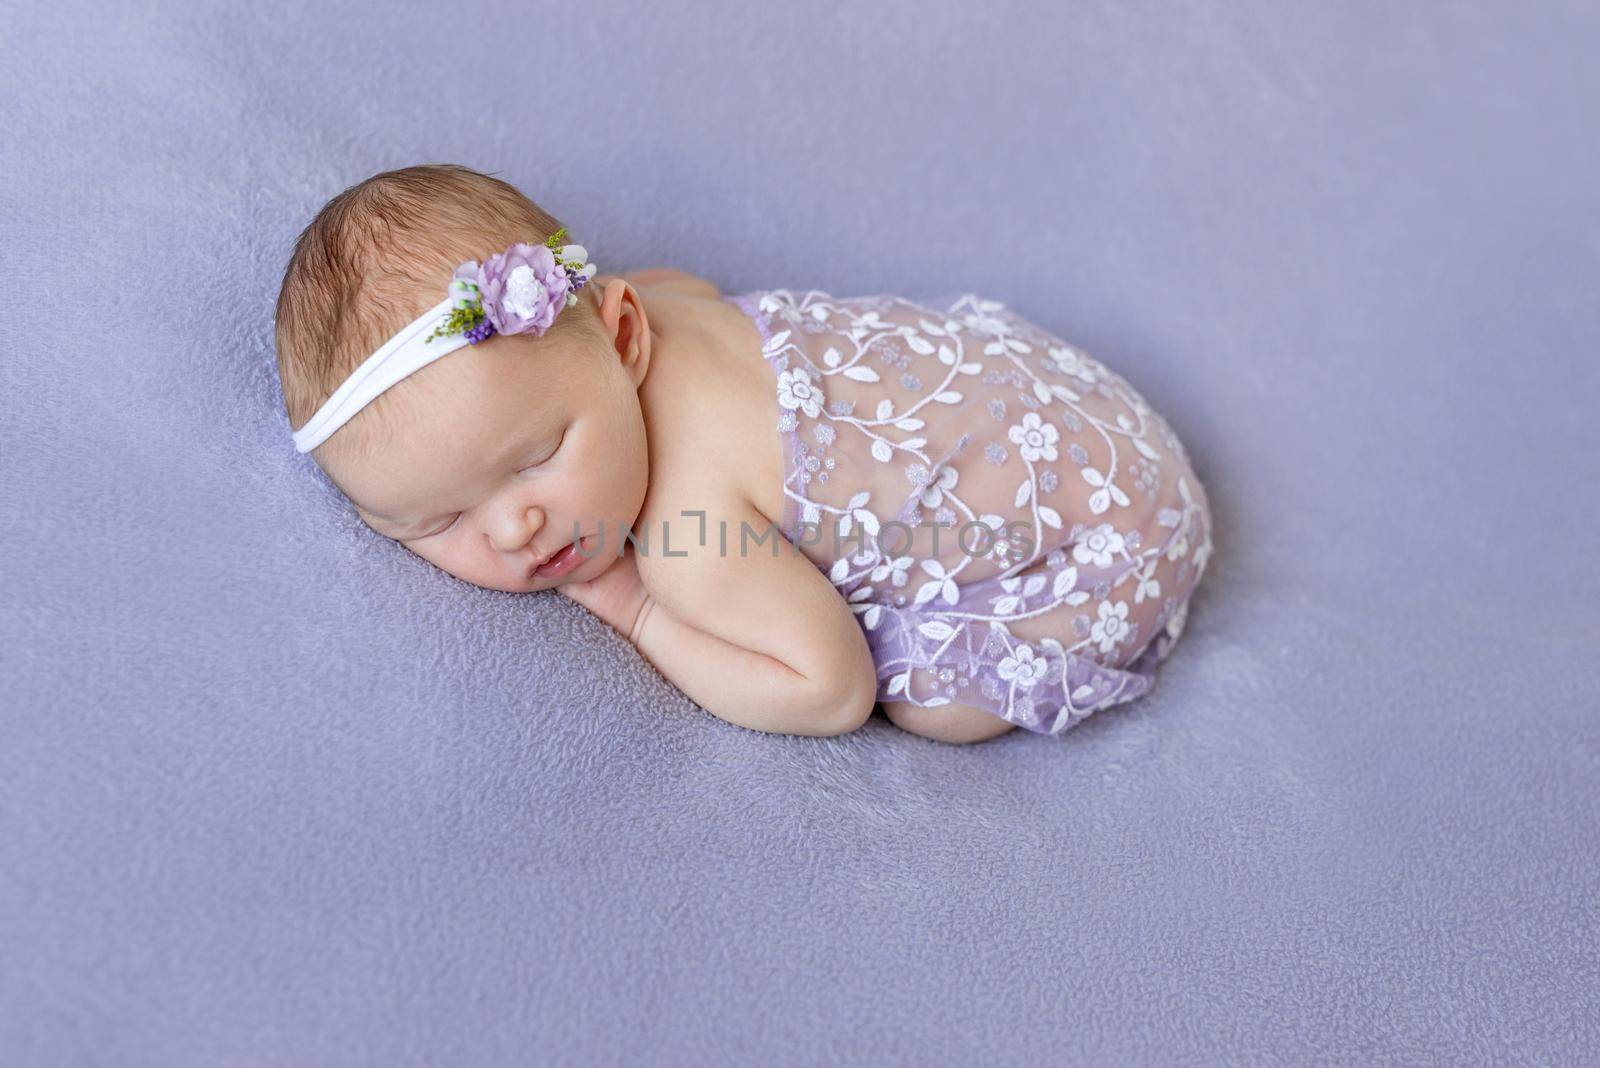 Cute infant sleeping covered with purple veil by tan4ikk1